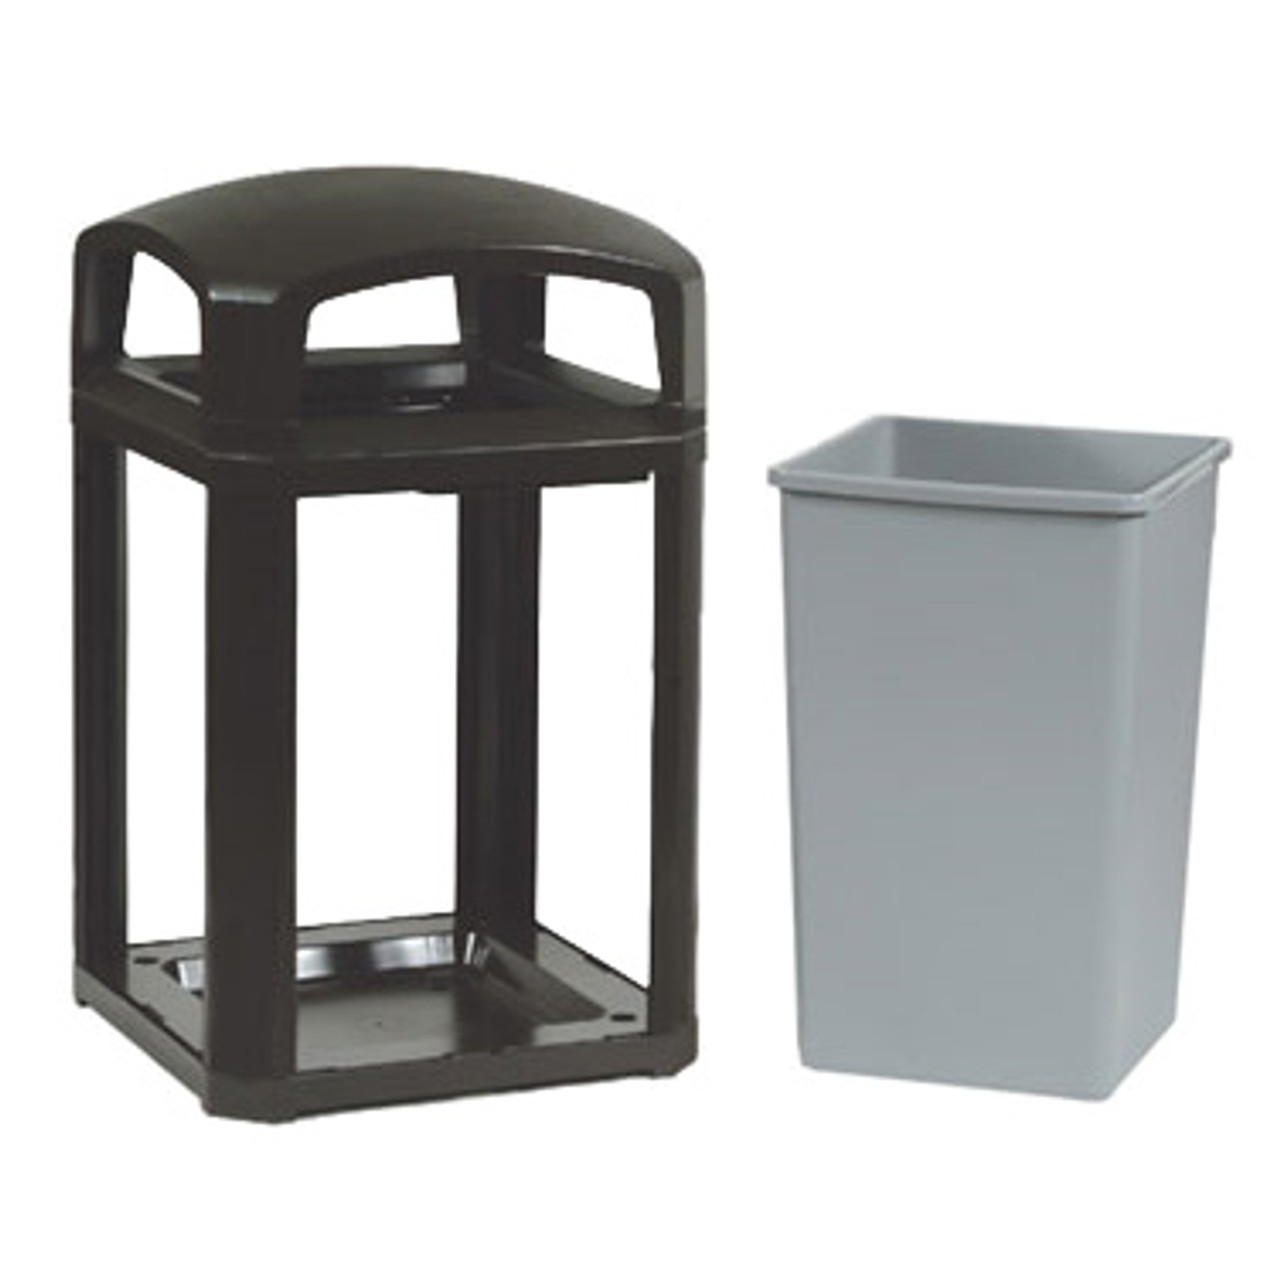 Rubbermaid Commercial Rigid Trash Can Liner,27-1/4 H x ,Gray